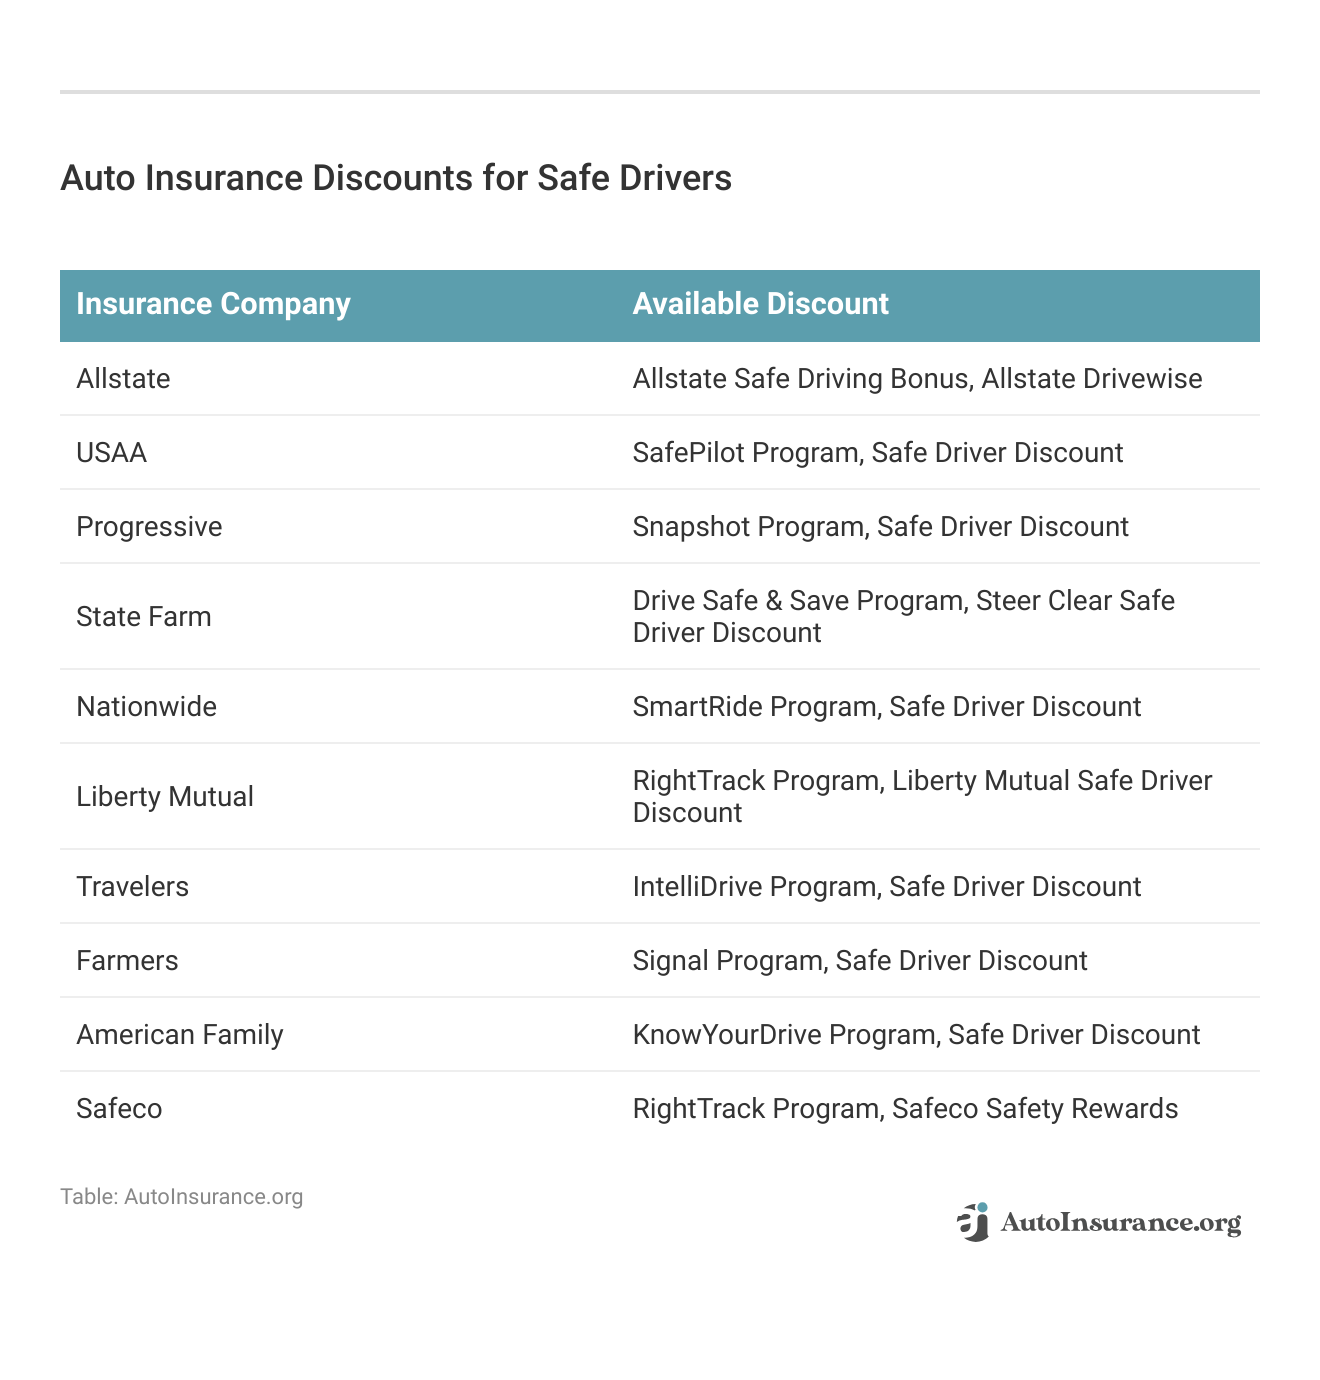 <h3>Auto Insurance Discounts for Safe Drivers</h3>